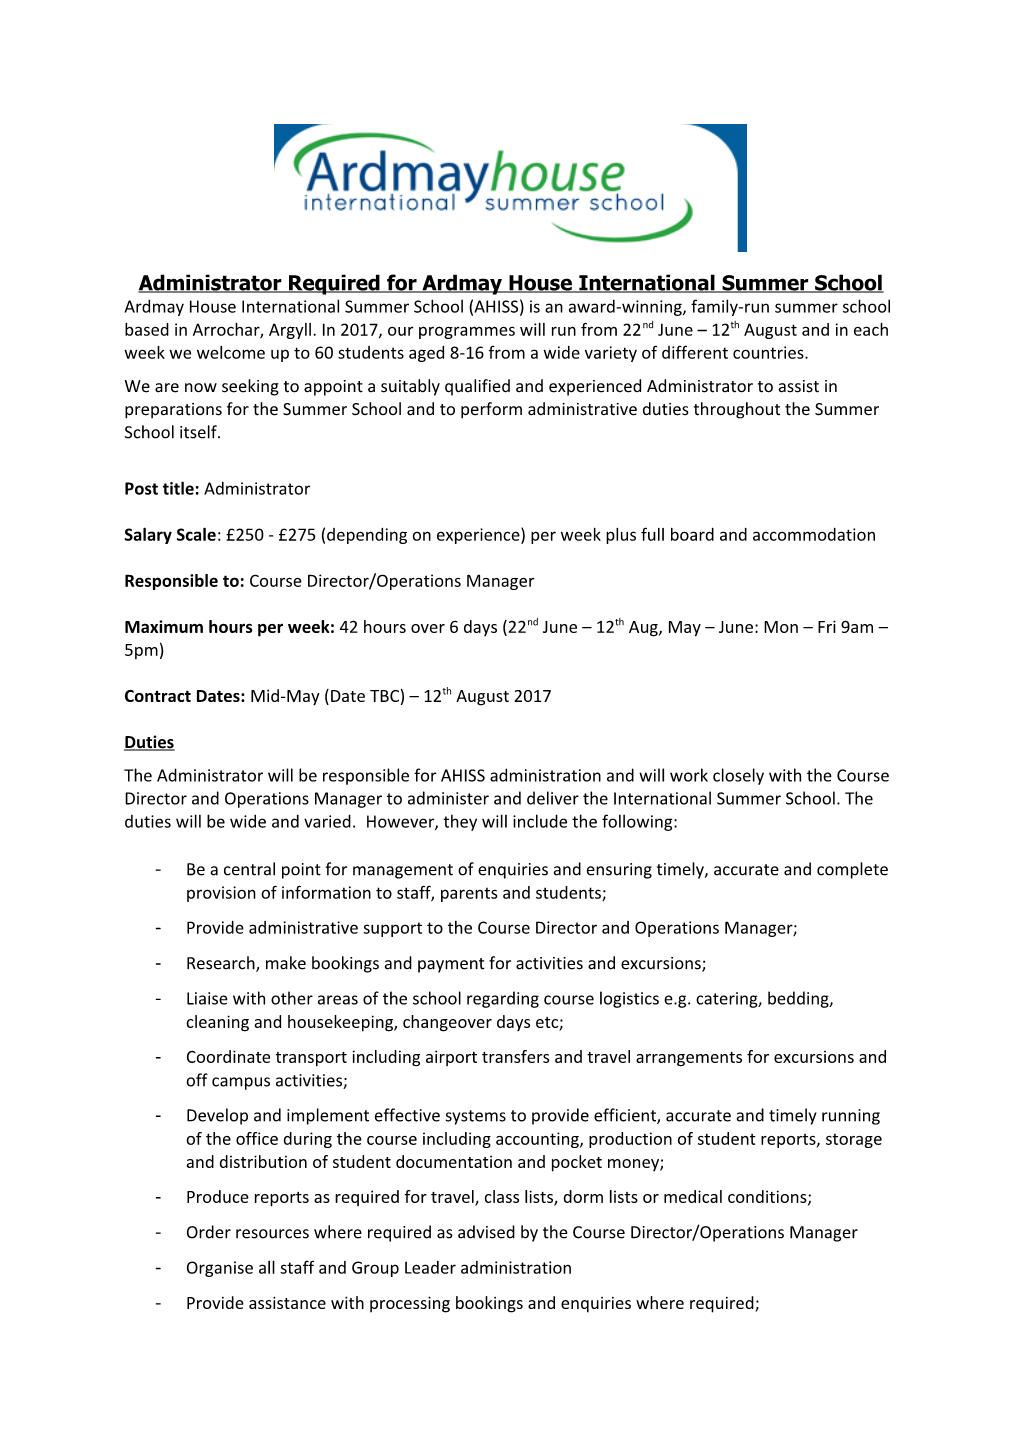 Administrator Required for Ardmay House International Summer School